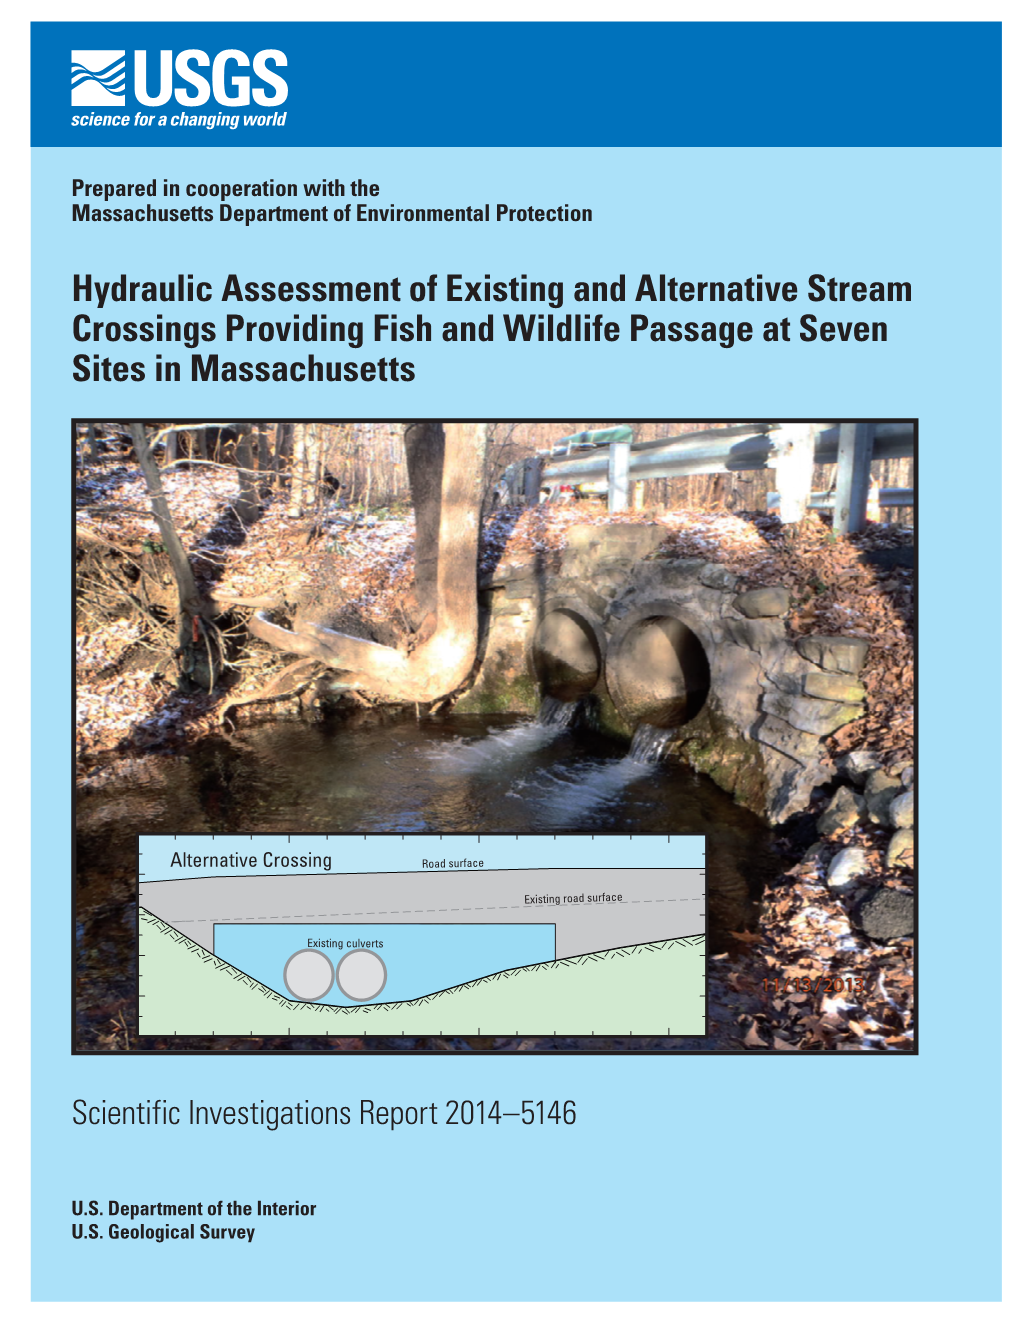 Hydraulic Assessment of Existing and Alternative Stream Crossings Providing Fish and Wildlife Passage at Seven Sites in Massachusetts